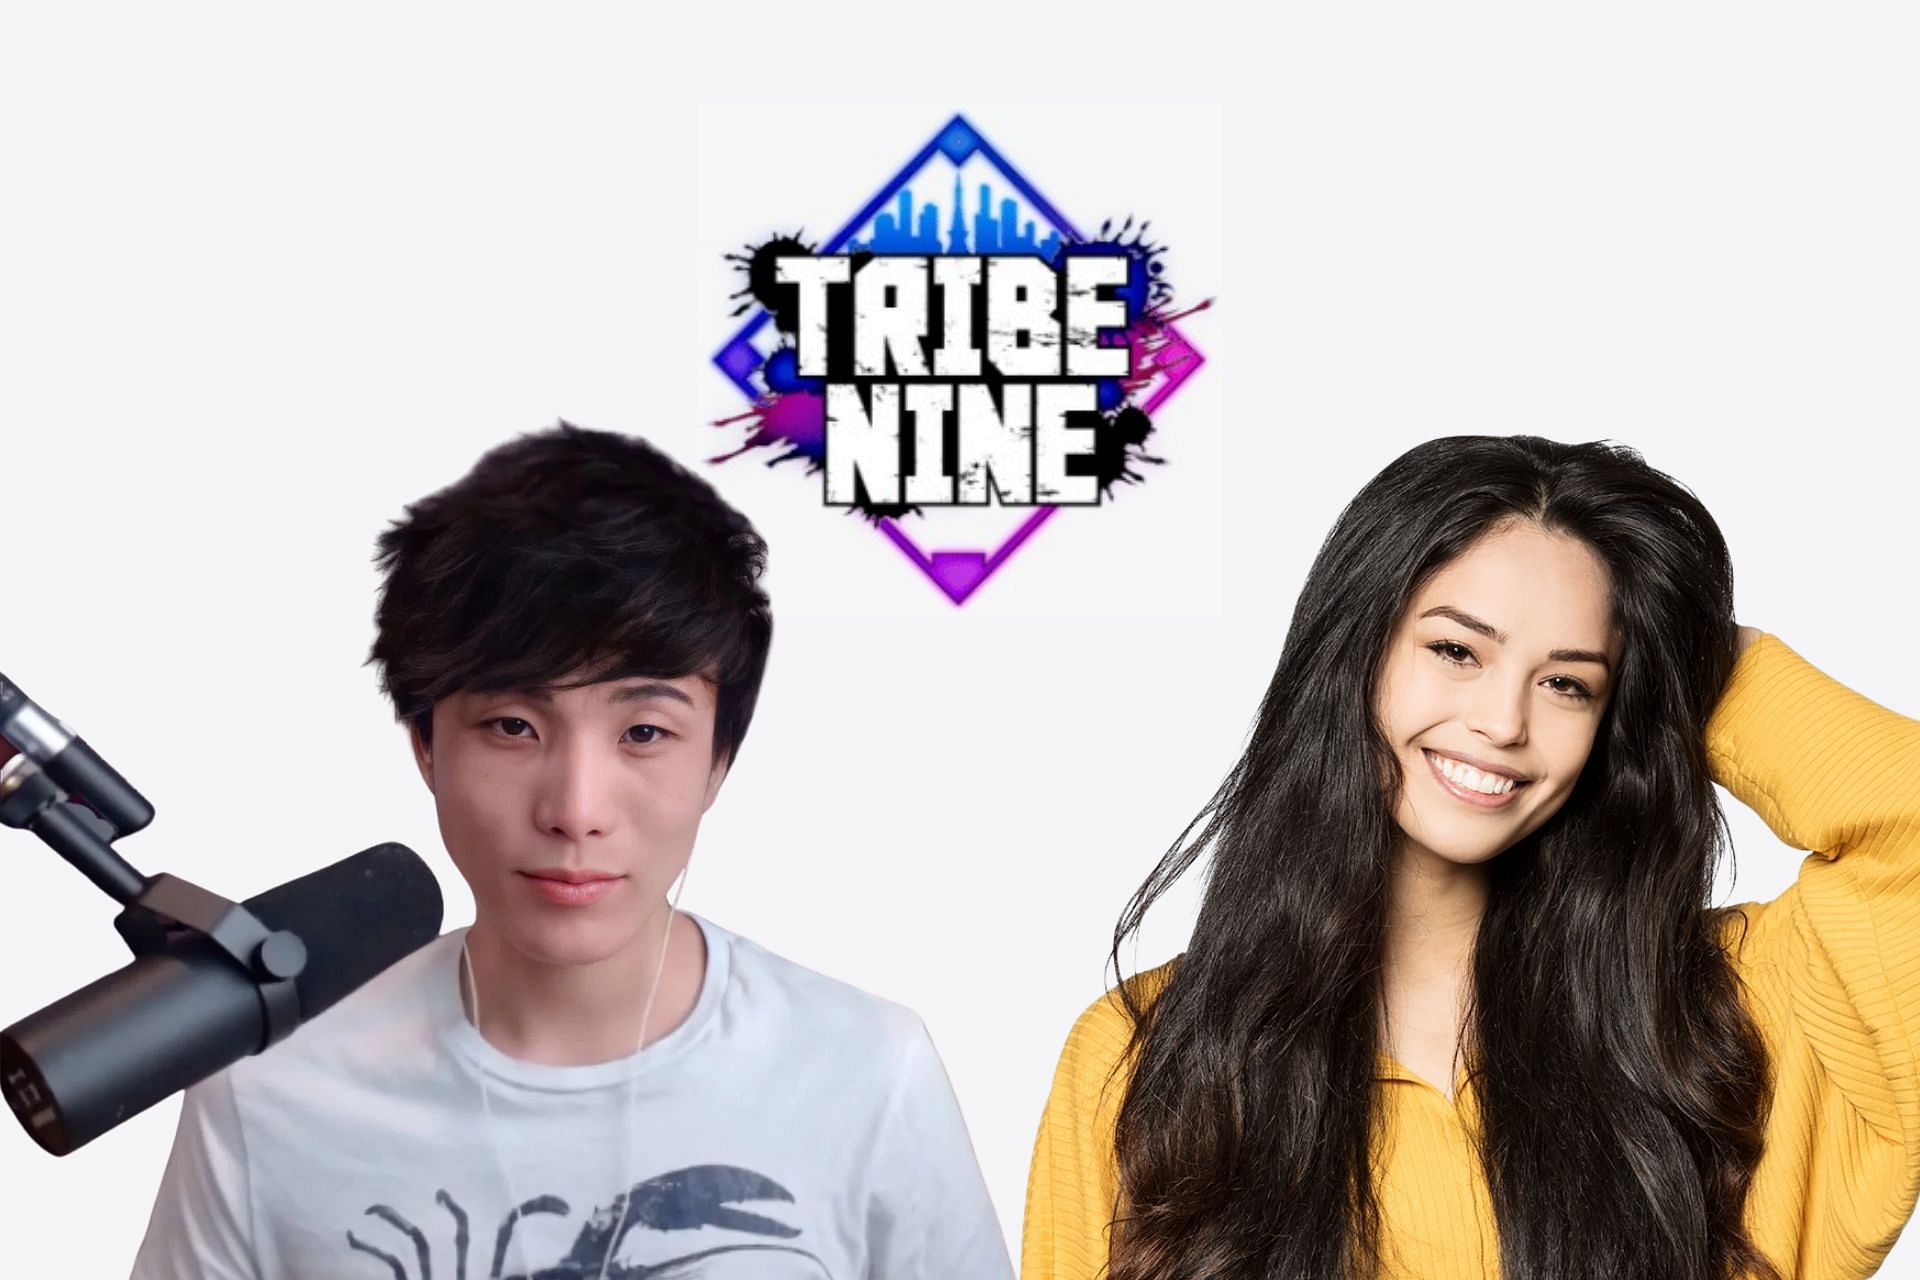 Sykkuno recently talked about his experience working with Valkyrae on the Tribe Nine anime (Image via Sportskeeda)